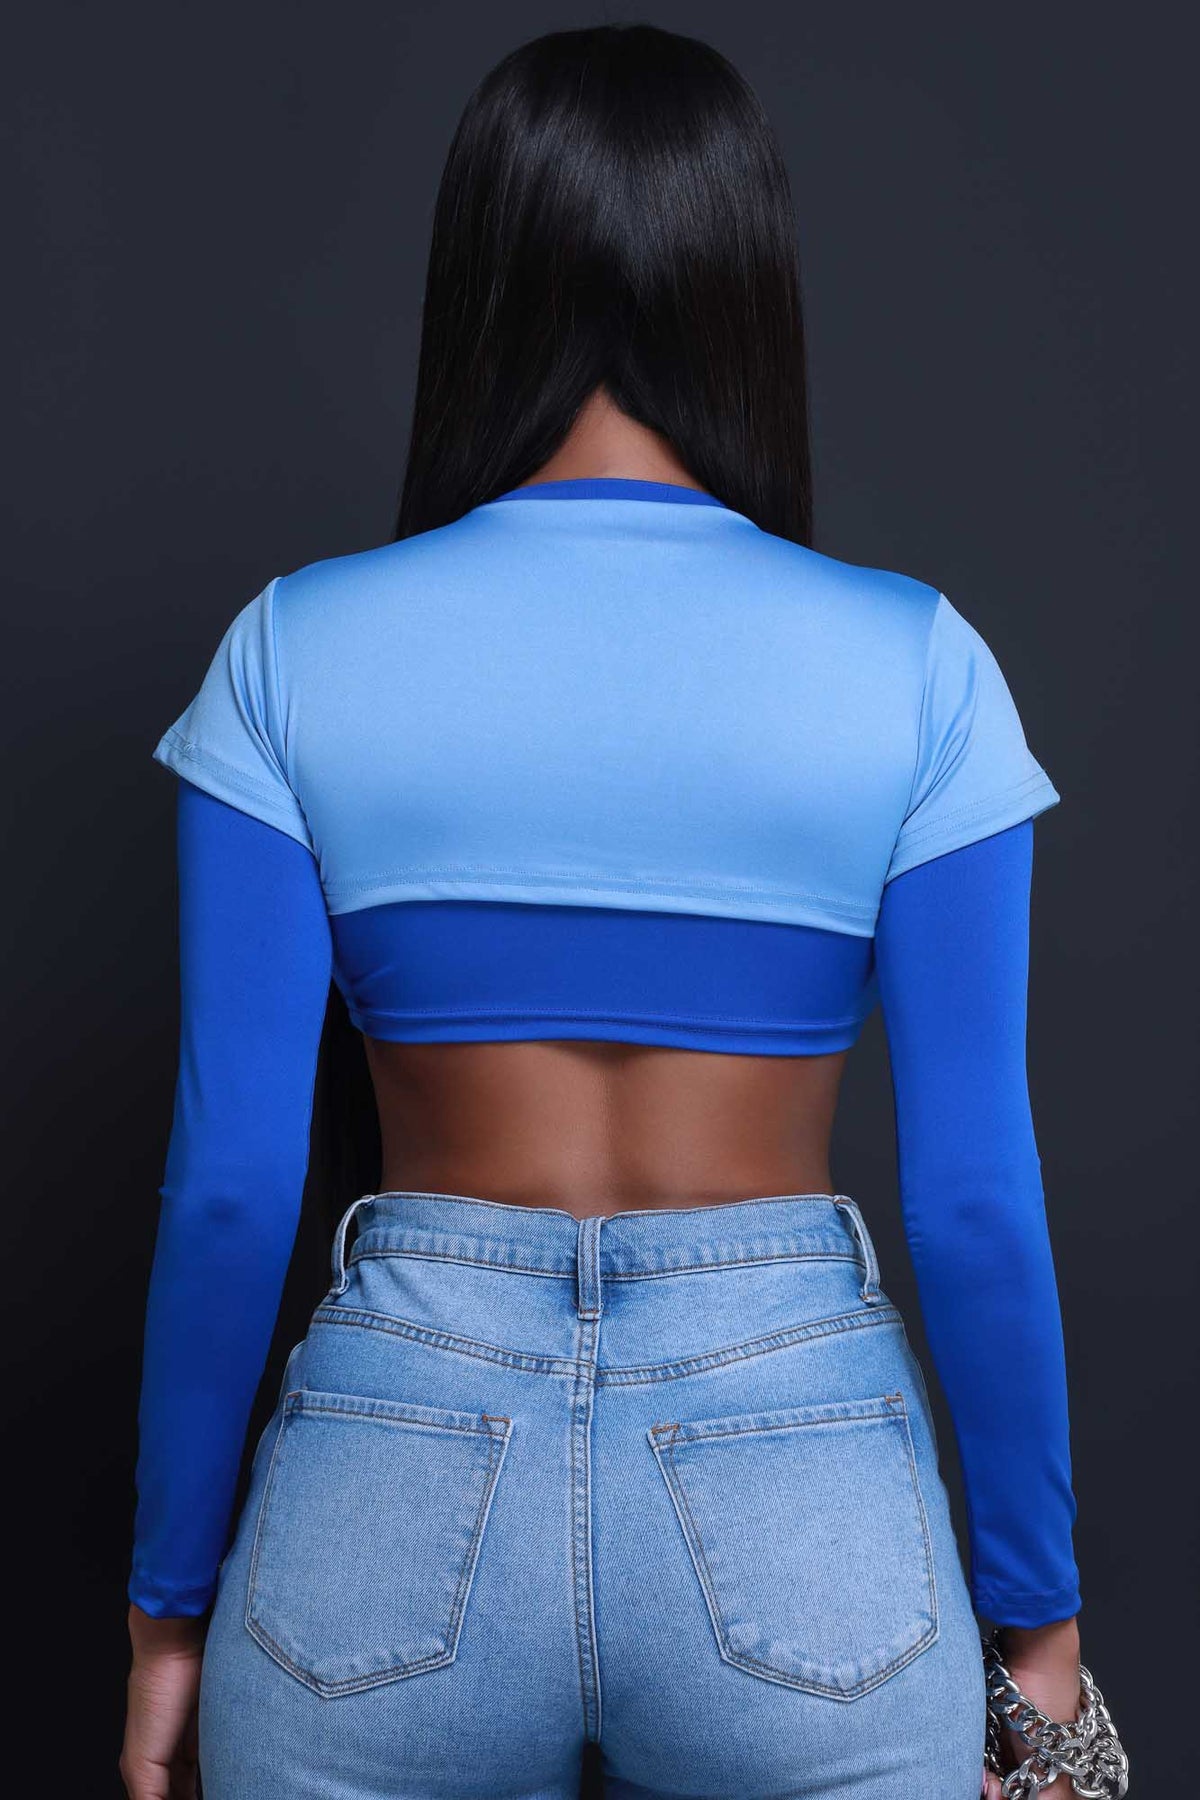 
              Dig Deeper Double Layer Crop Top - Baby Blue/Royal Blue - Swank A Posh
            